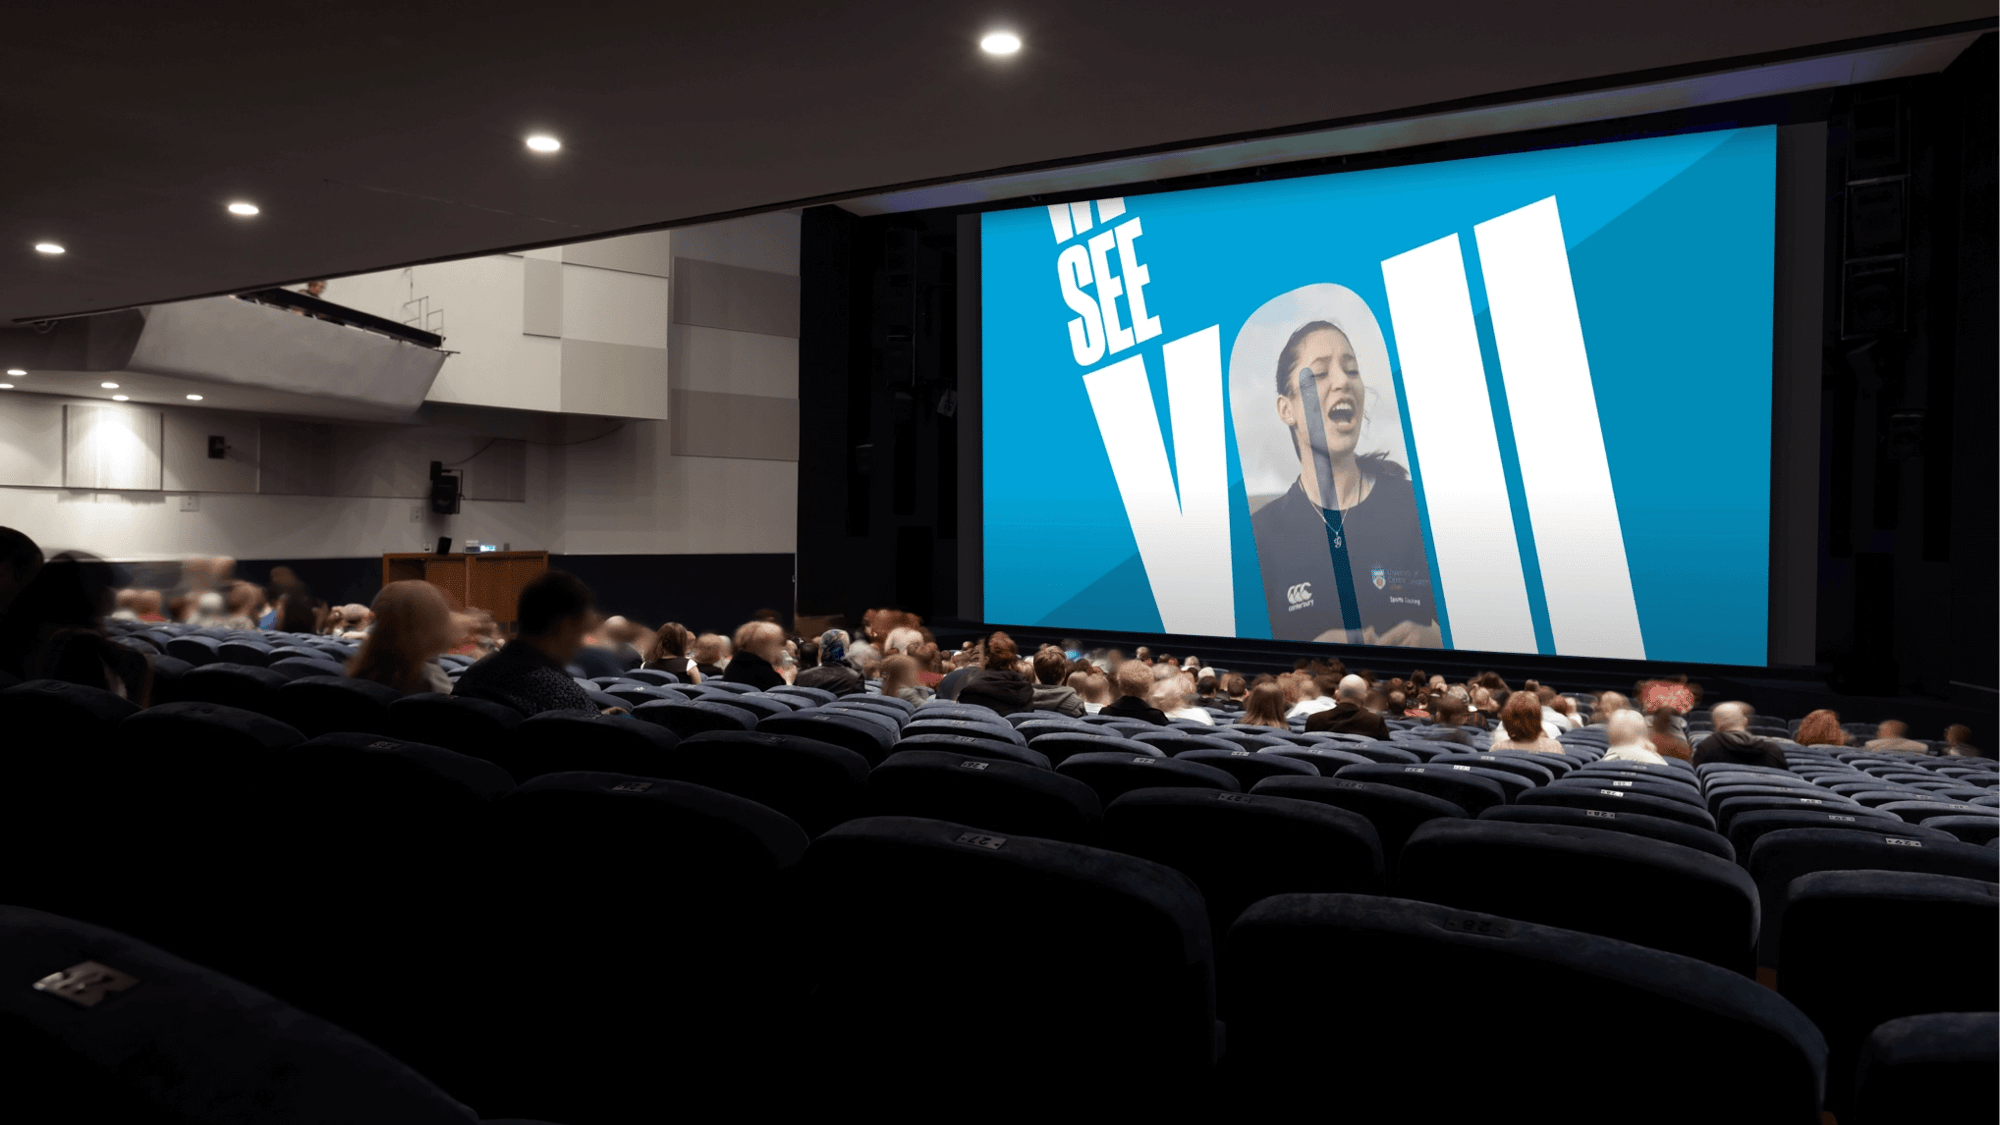 The campaign video playing on cinema screens.